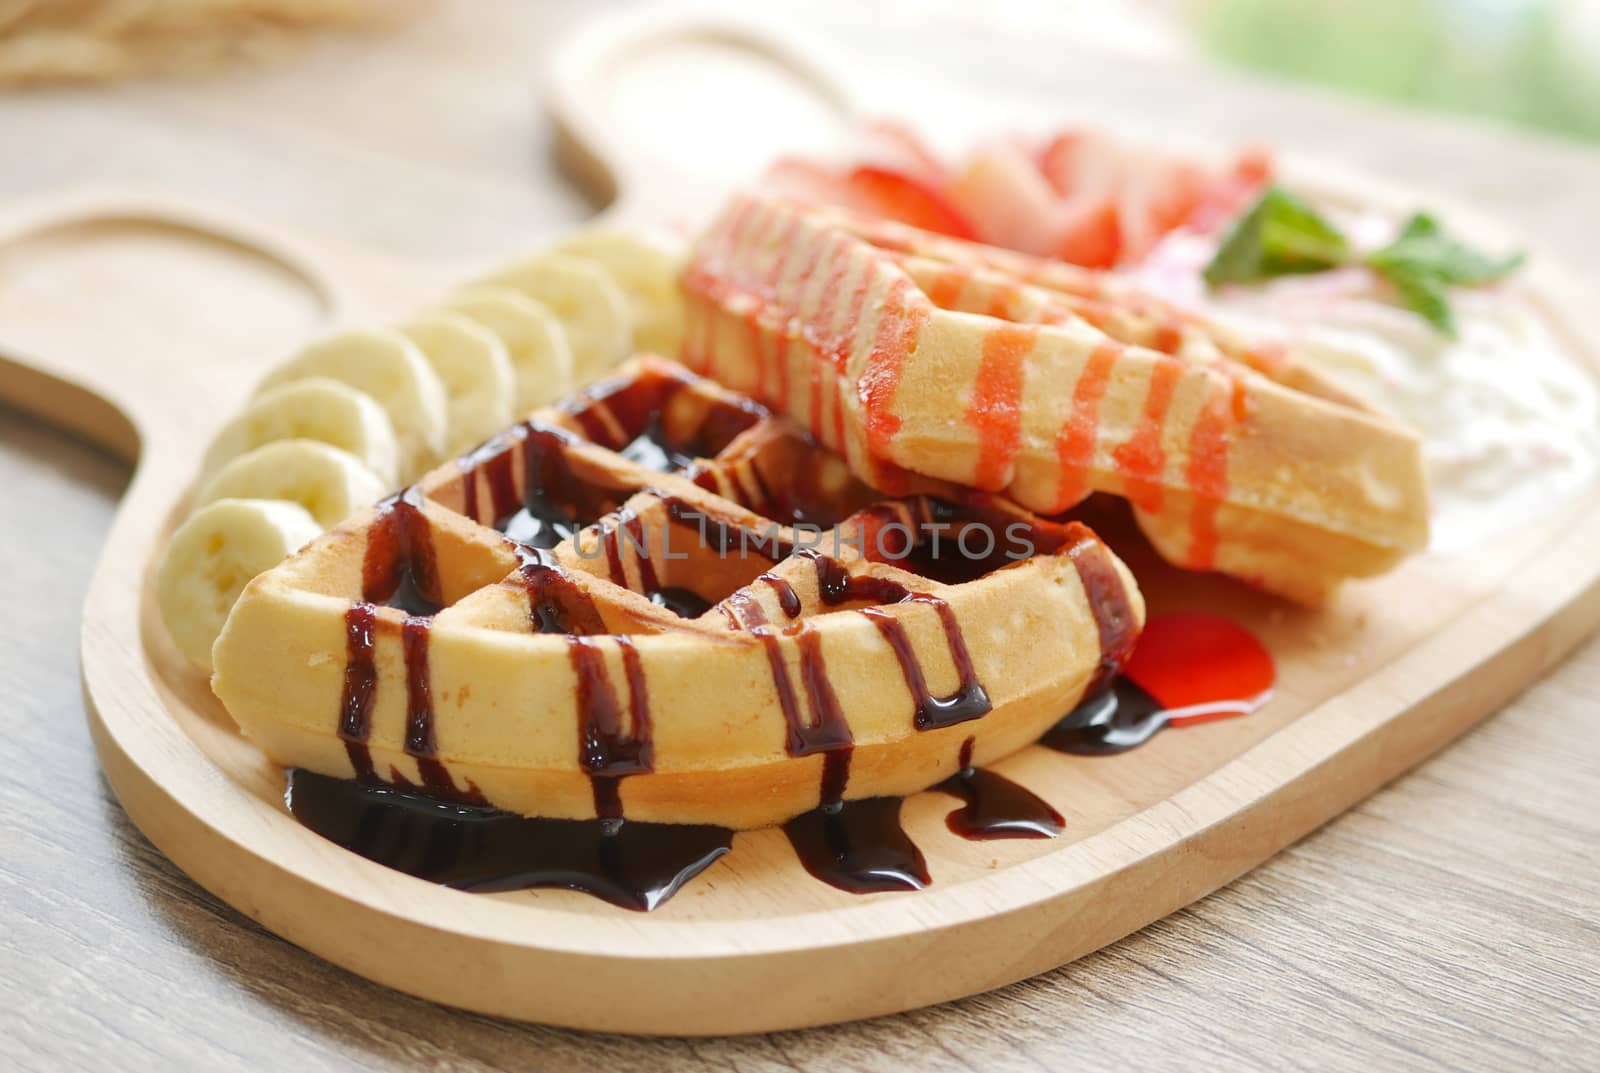 tasty waffle topped with strawberry syrup and chocolate sauce, side dishes are fresh strawberry chopped , banana , whipped cream and ice cream served on cute wooden plate by asiandelight